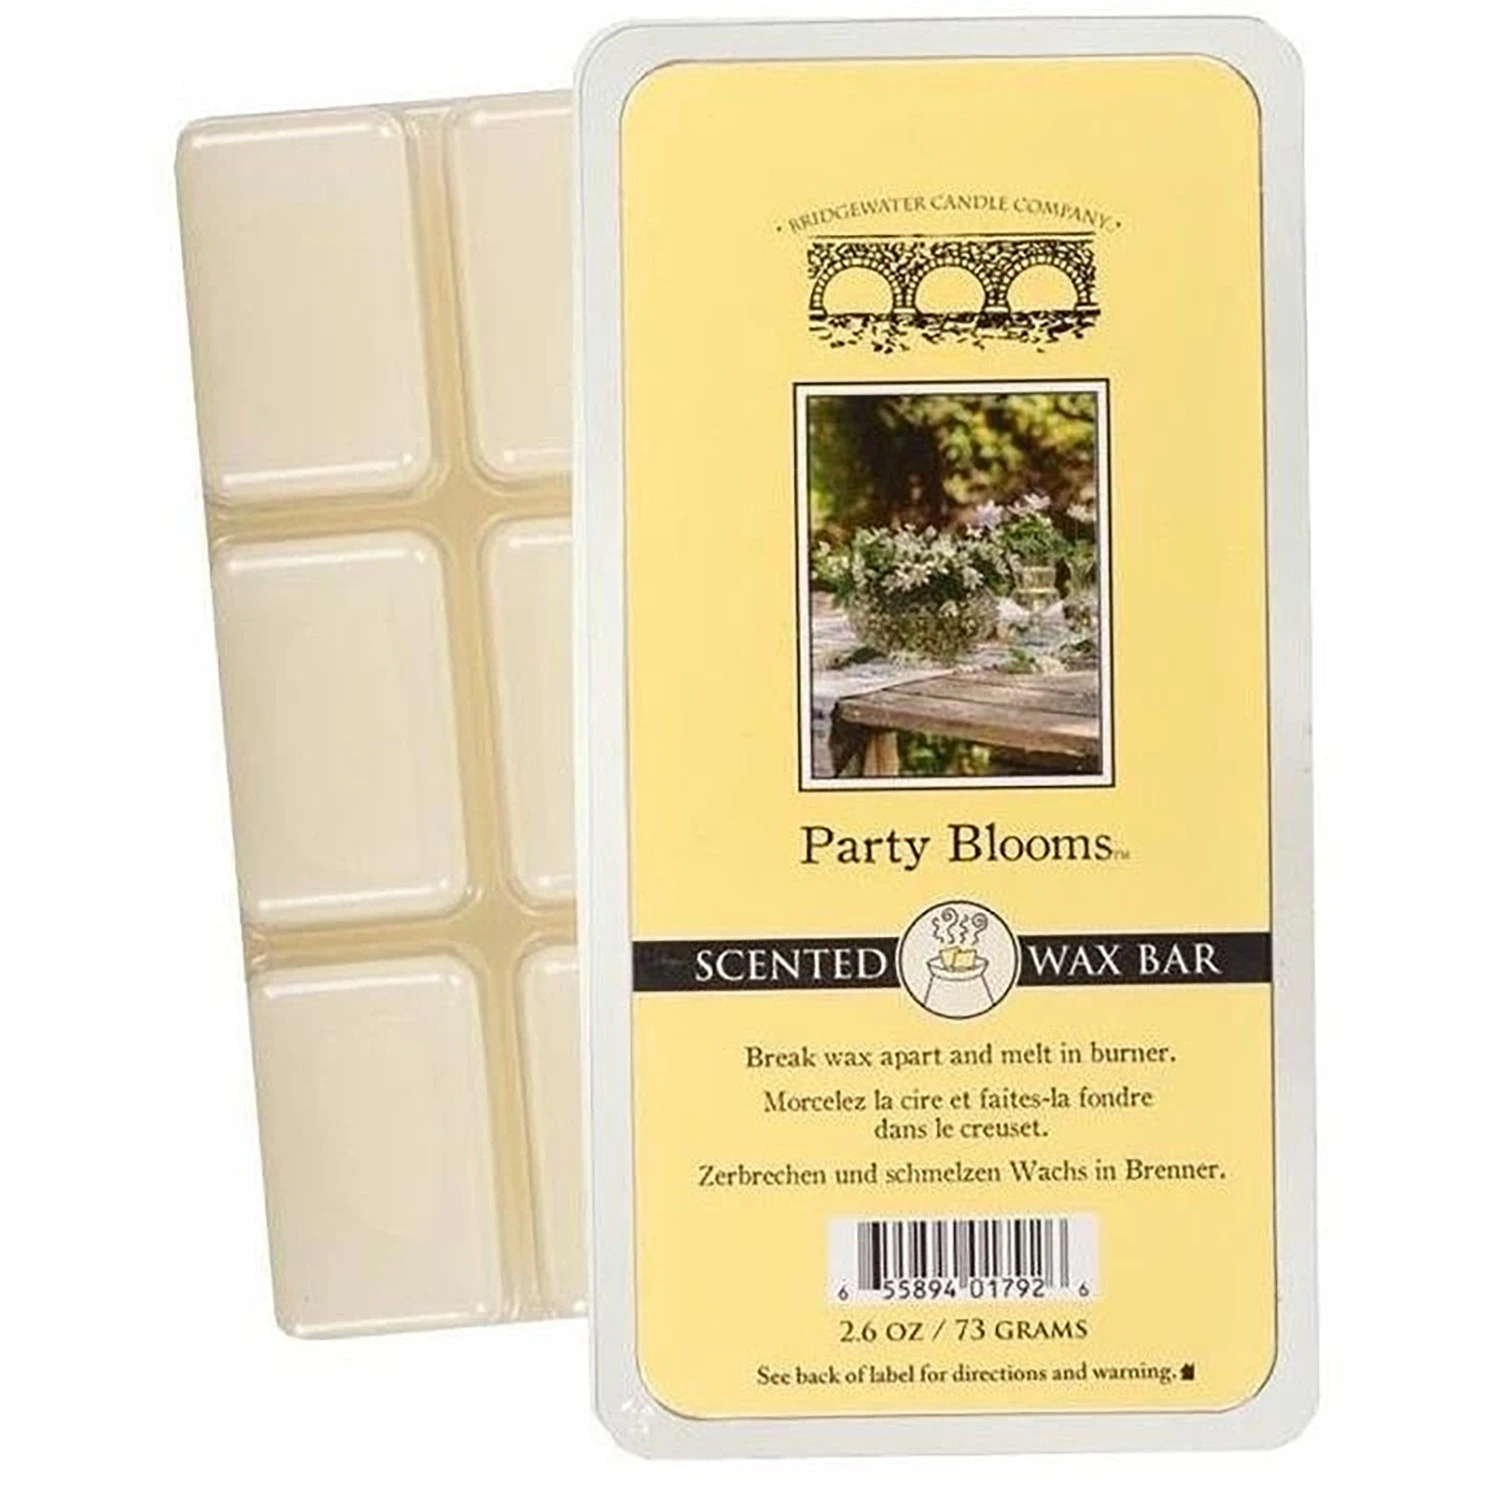 Bridgewater Candle Company Scented Wax Bar wosk zapachowy do aromaterapii 73 g - Party Blooms